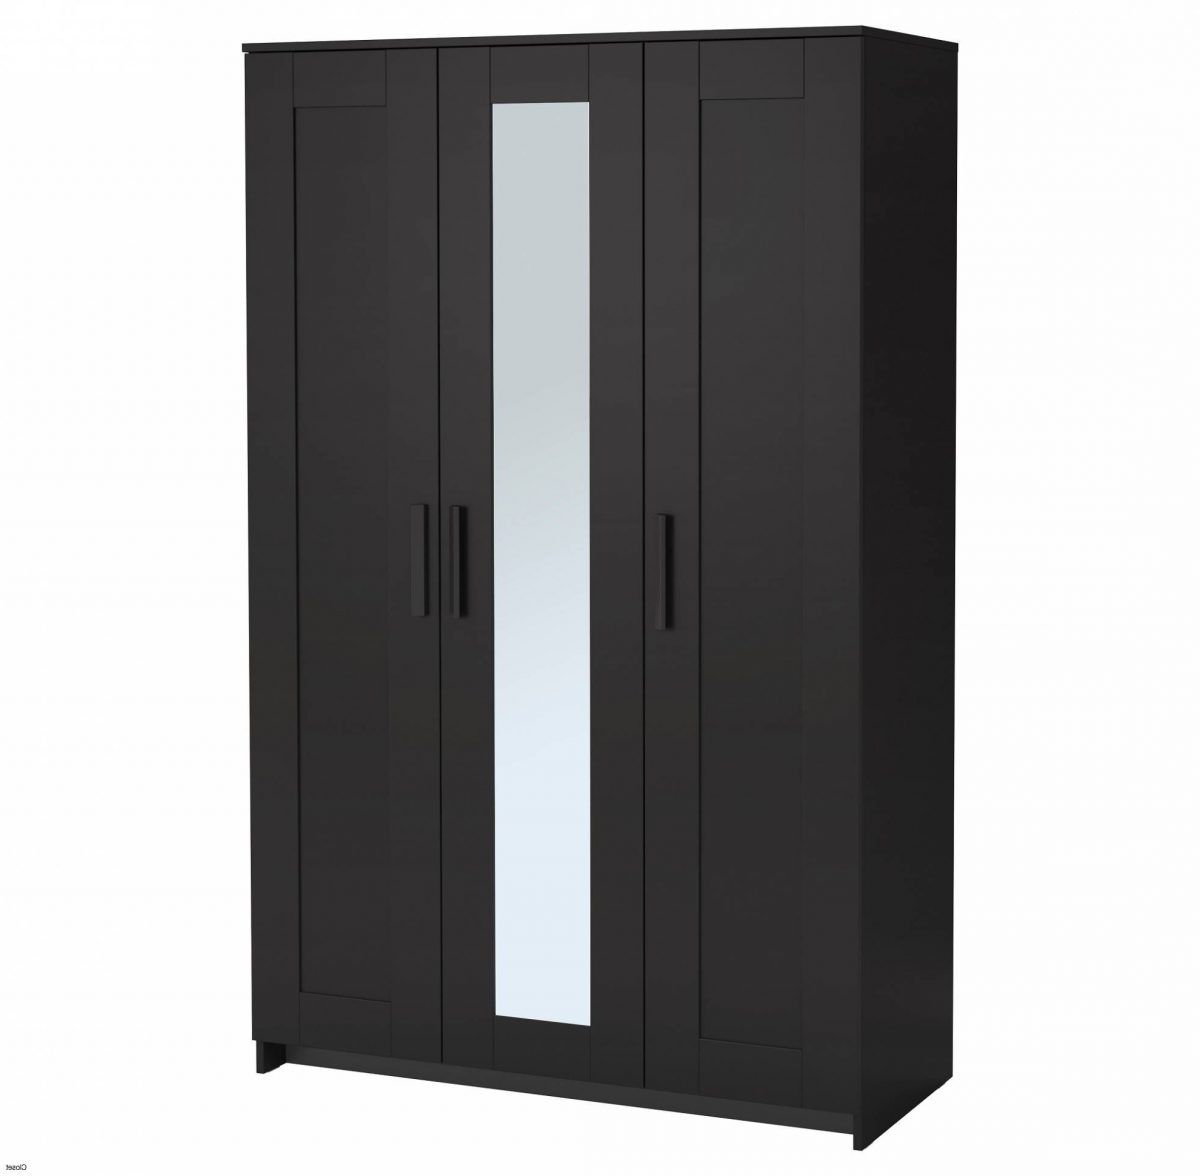 Trendy Black Wardrobes For 11 Elegant Cheap Black Wardrobes • Tactical Being Minimalist (View 4 of 15)